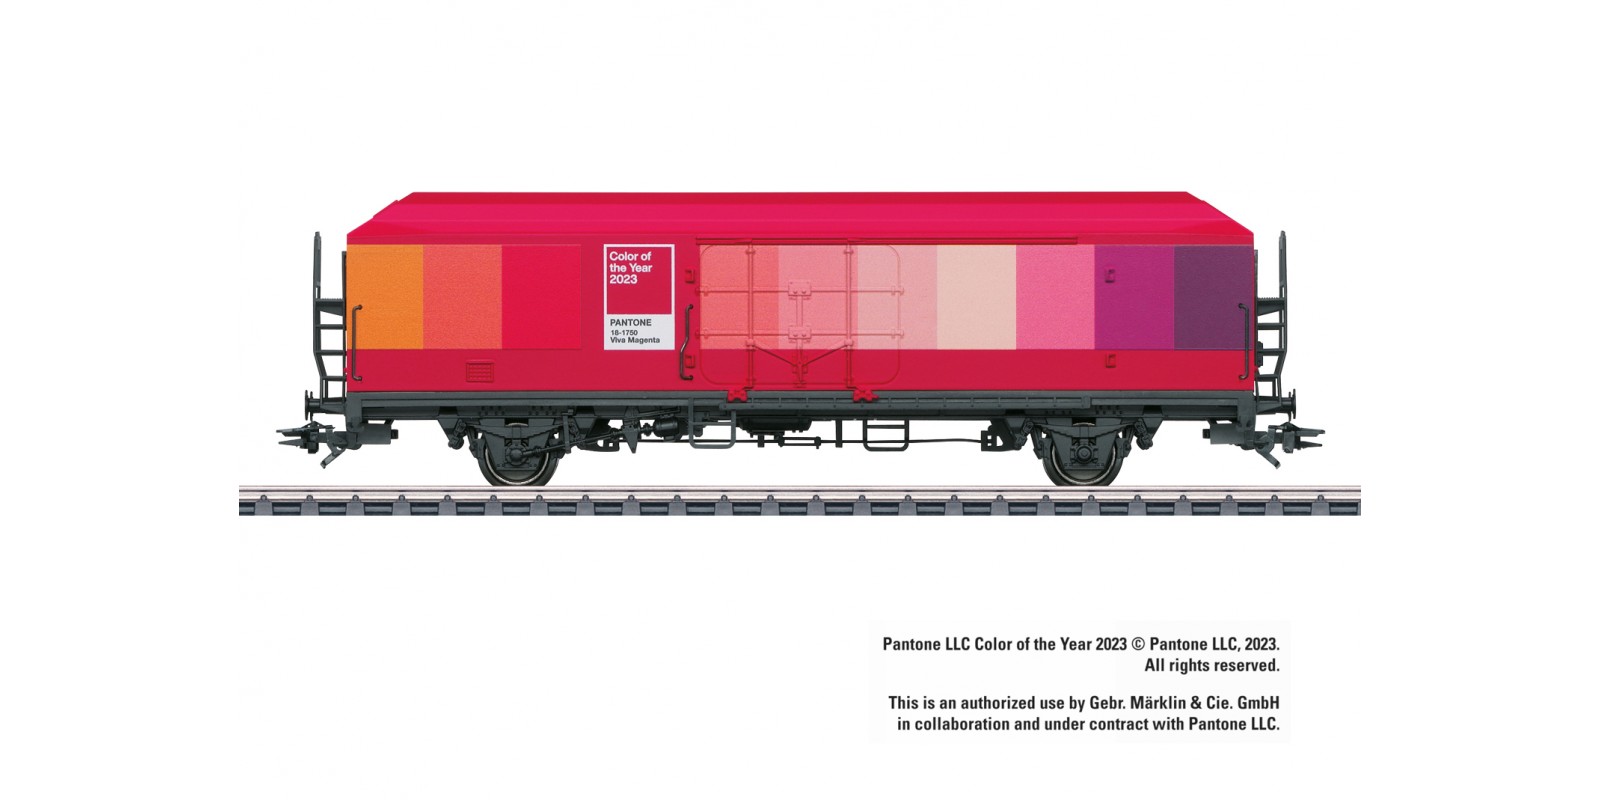 48553 PANTONE Color of the Year Car